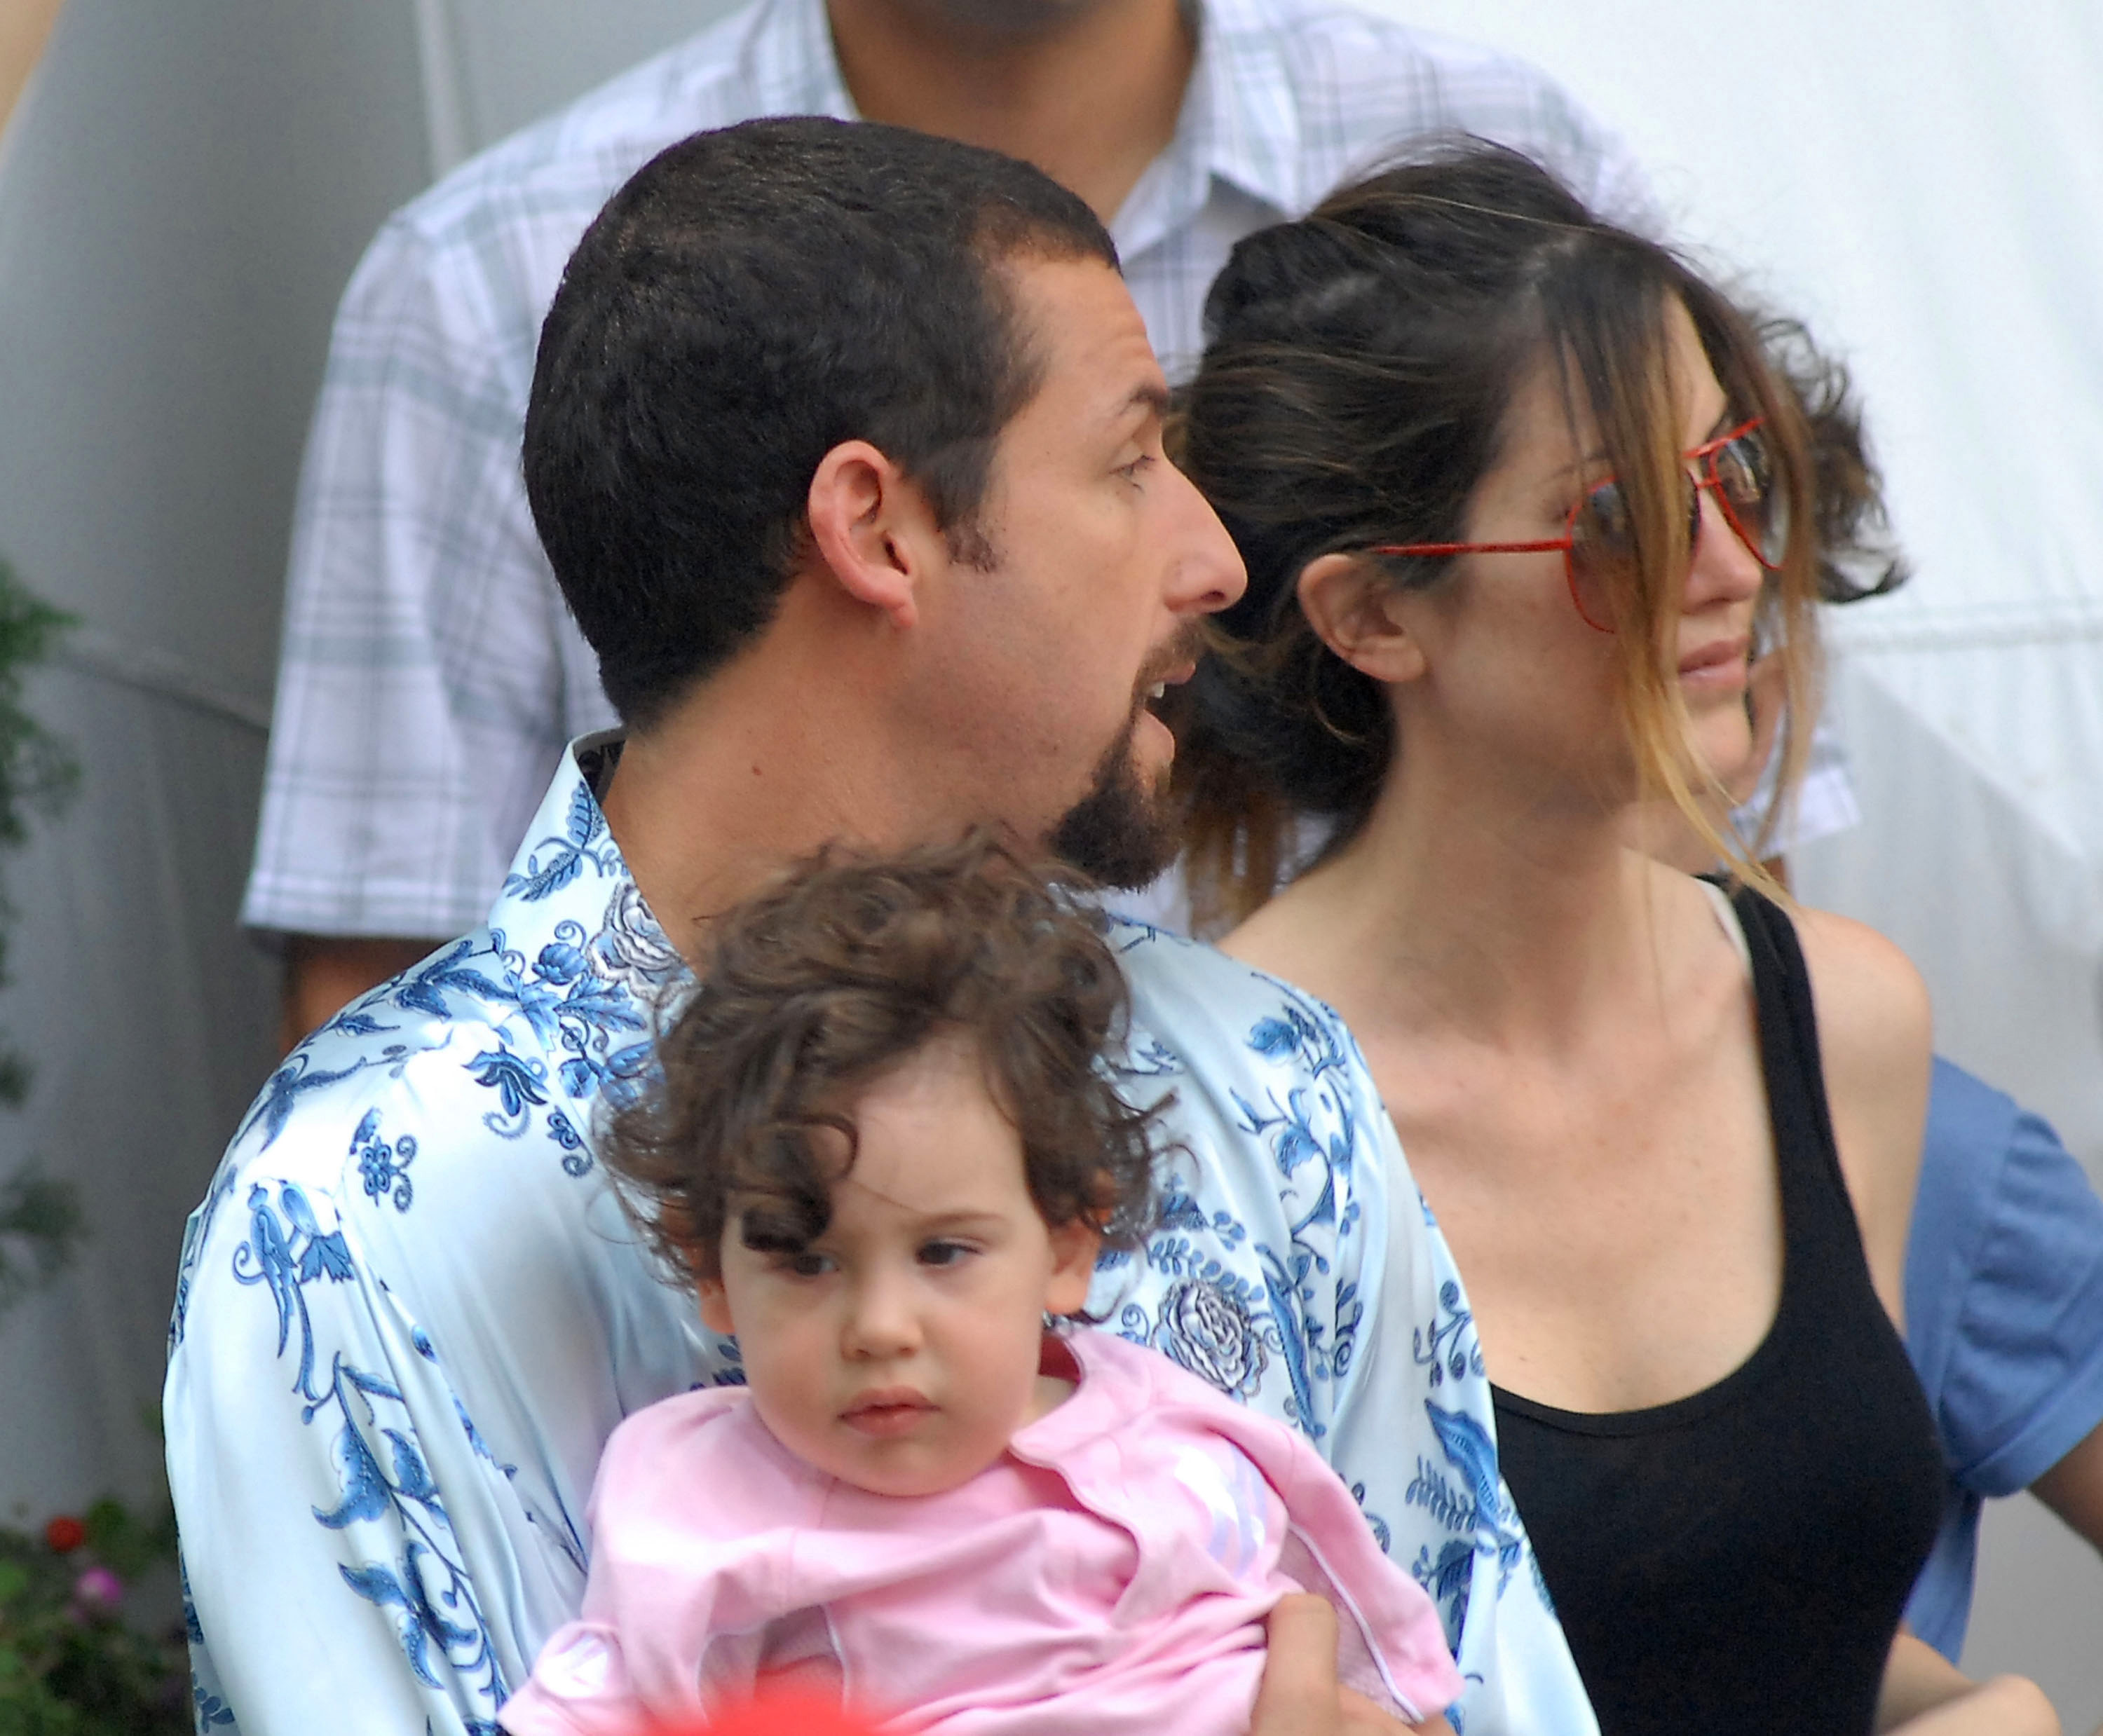 Adam Sandler, Jackie Sandler, and their then-one-year-old Sadie Sandler on the set of "You Don't Mess With The Zohan" at 54th Street and Park Avenue, on August 1, 2007, in New York City. | Source: Getty Images